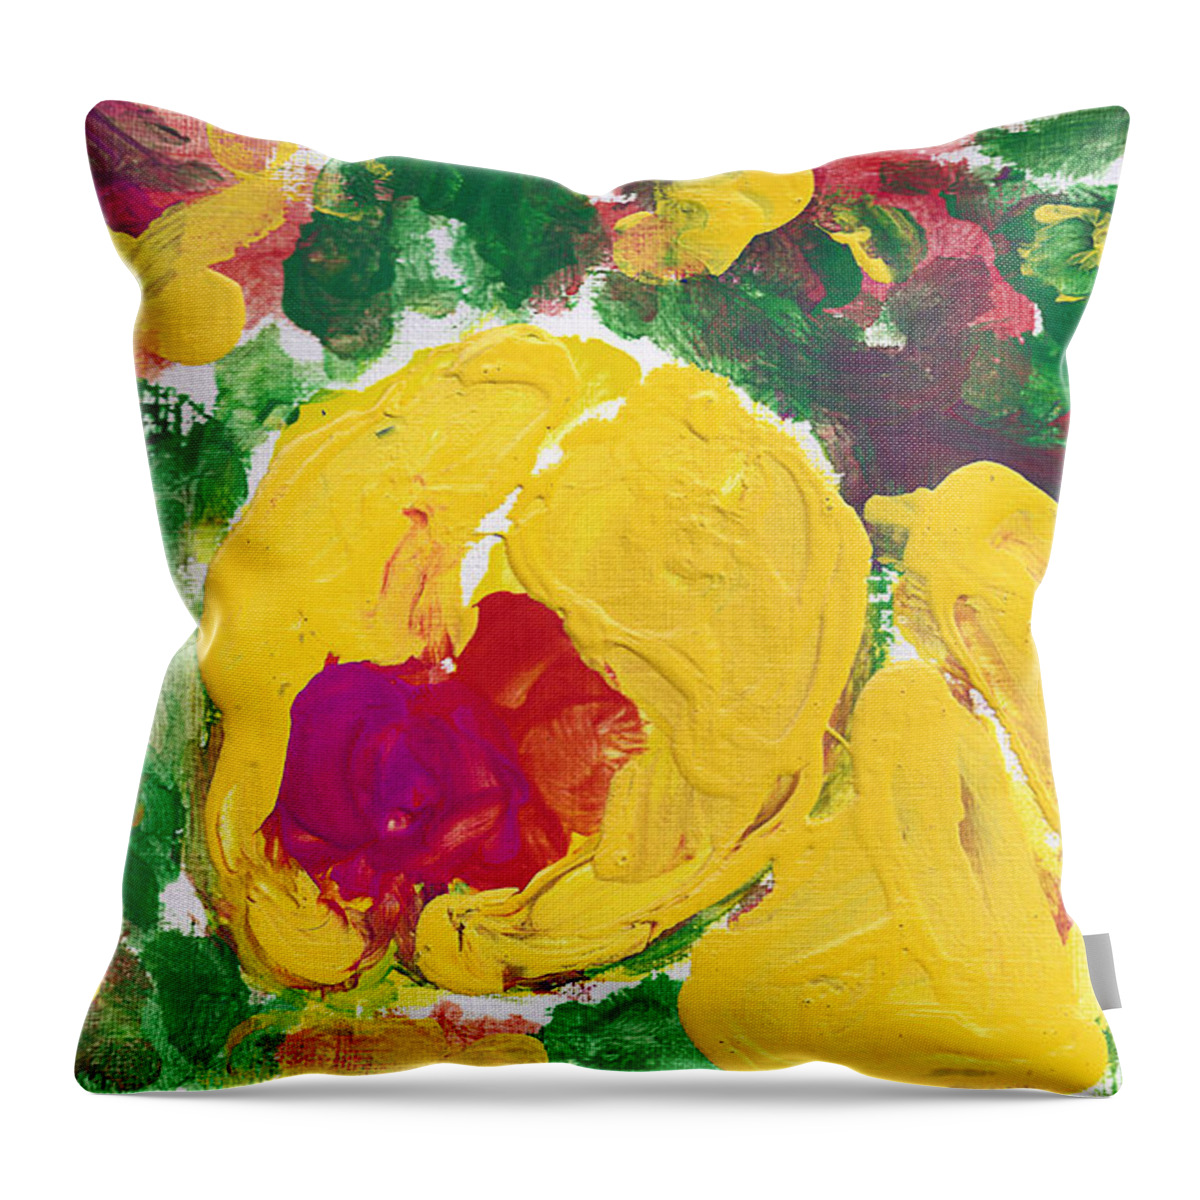 Fruit Throw Pillow featuring the painting Fruit Sense by Jade Knights